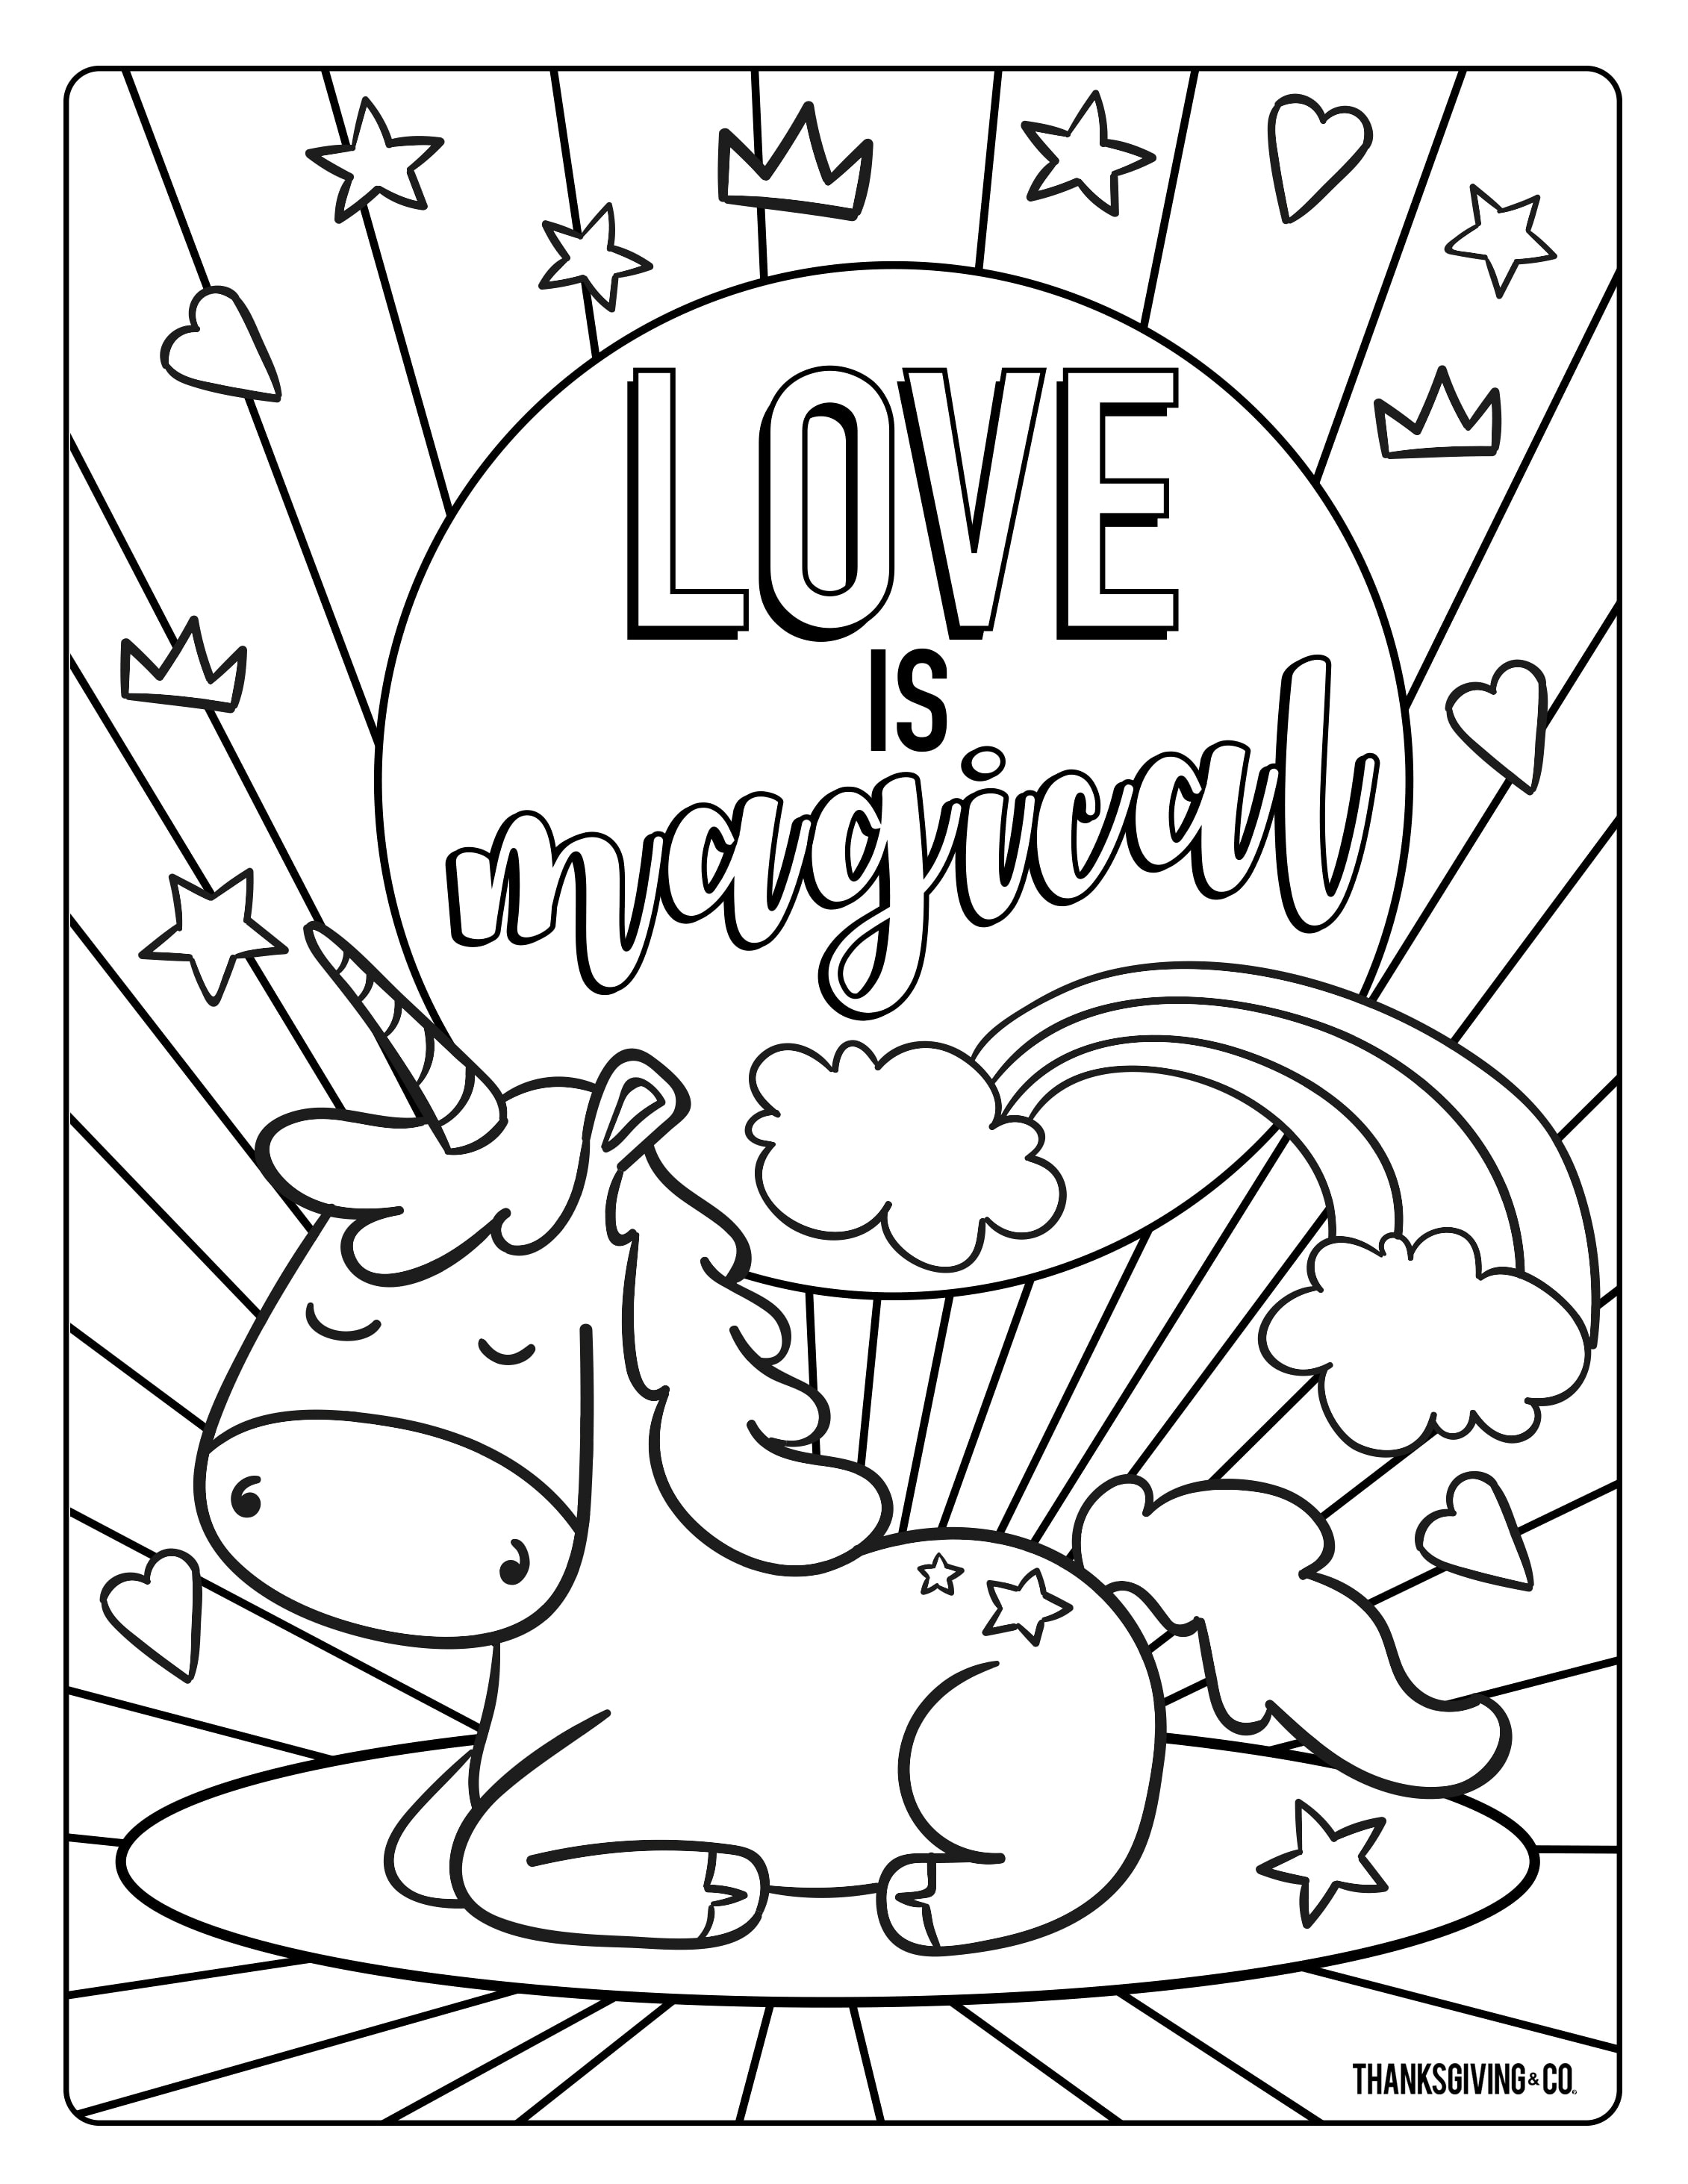 20 free Valentine's Day coloring pages for kids